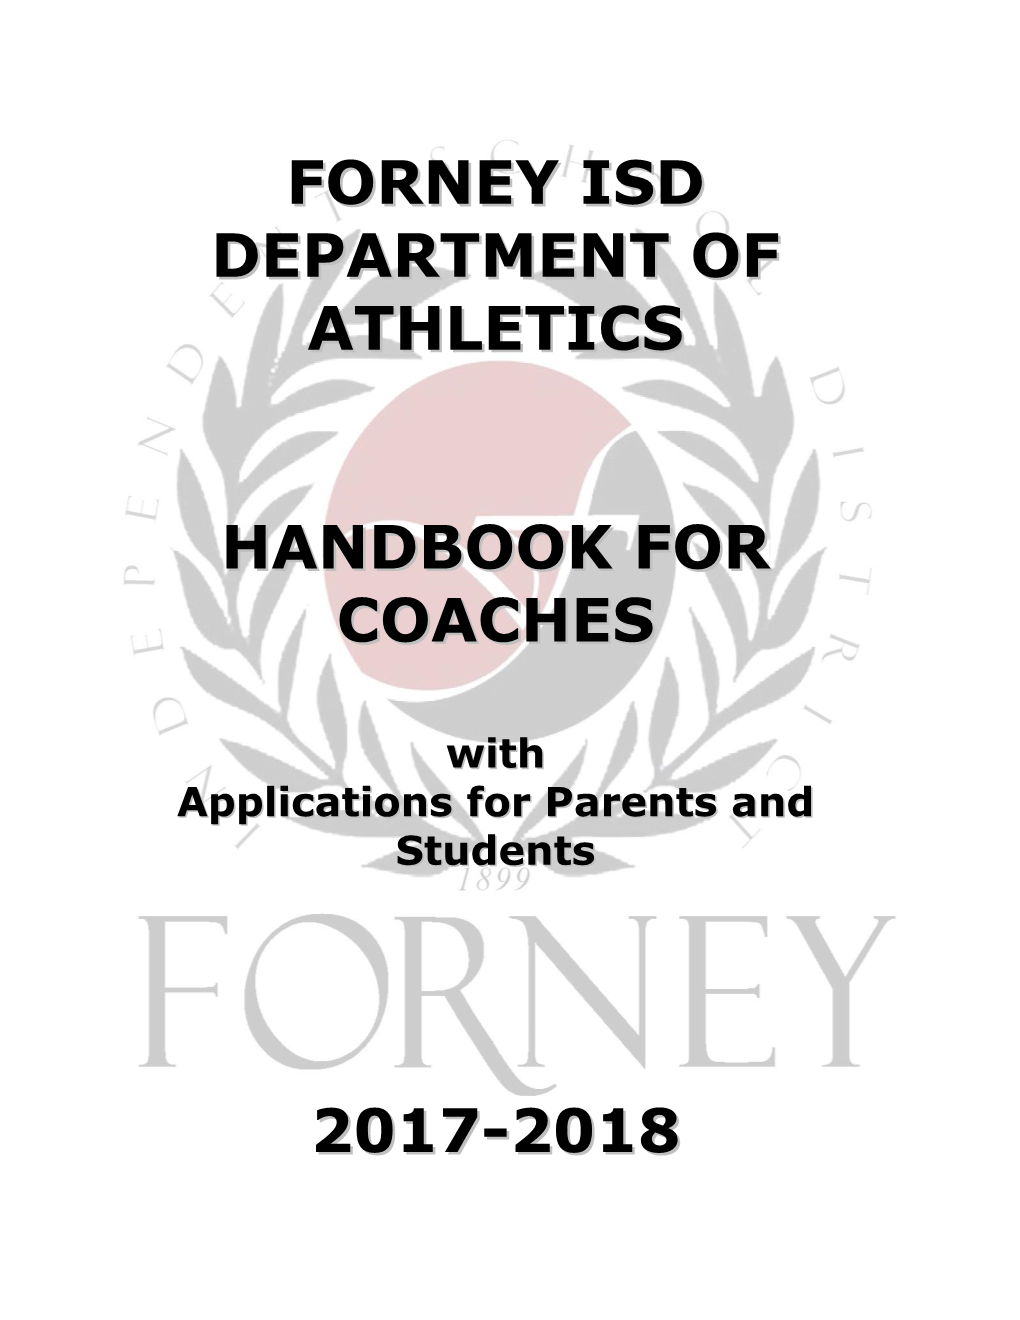 Forney Isd Department of Athletics Handbook for Coaches